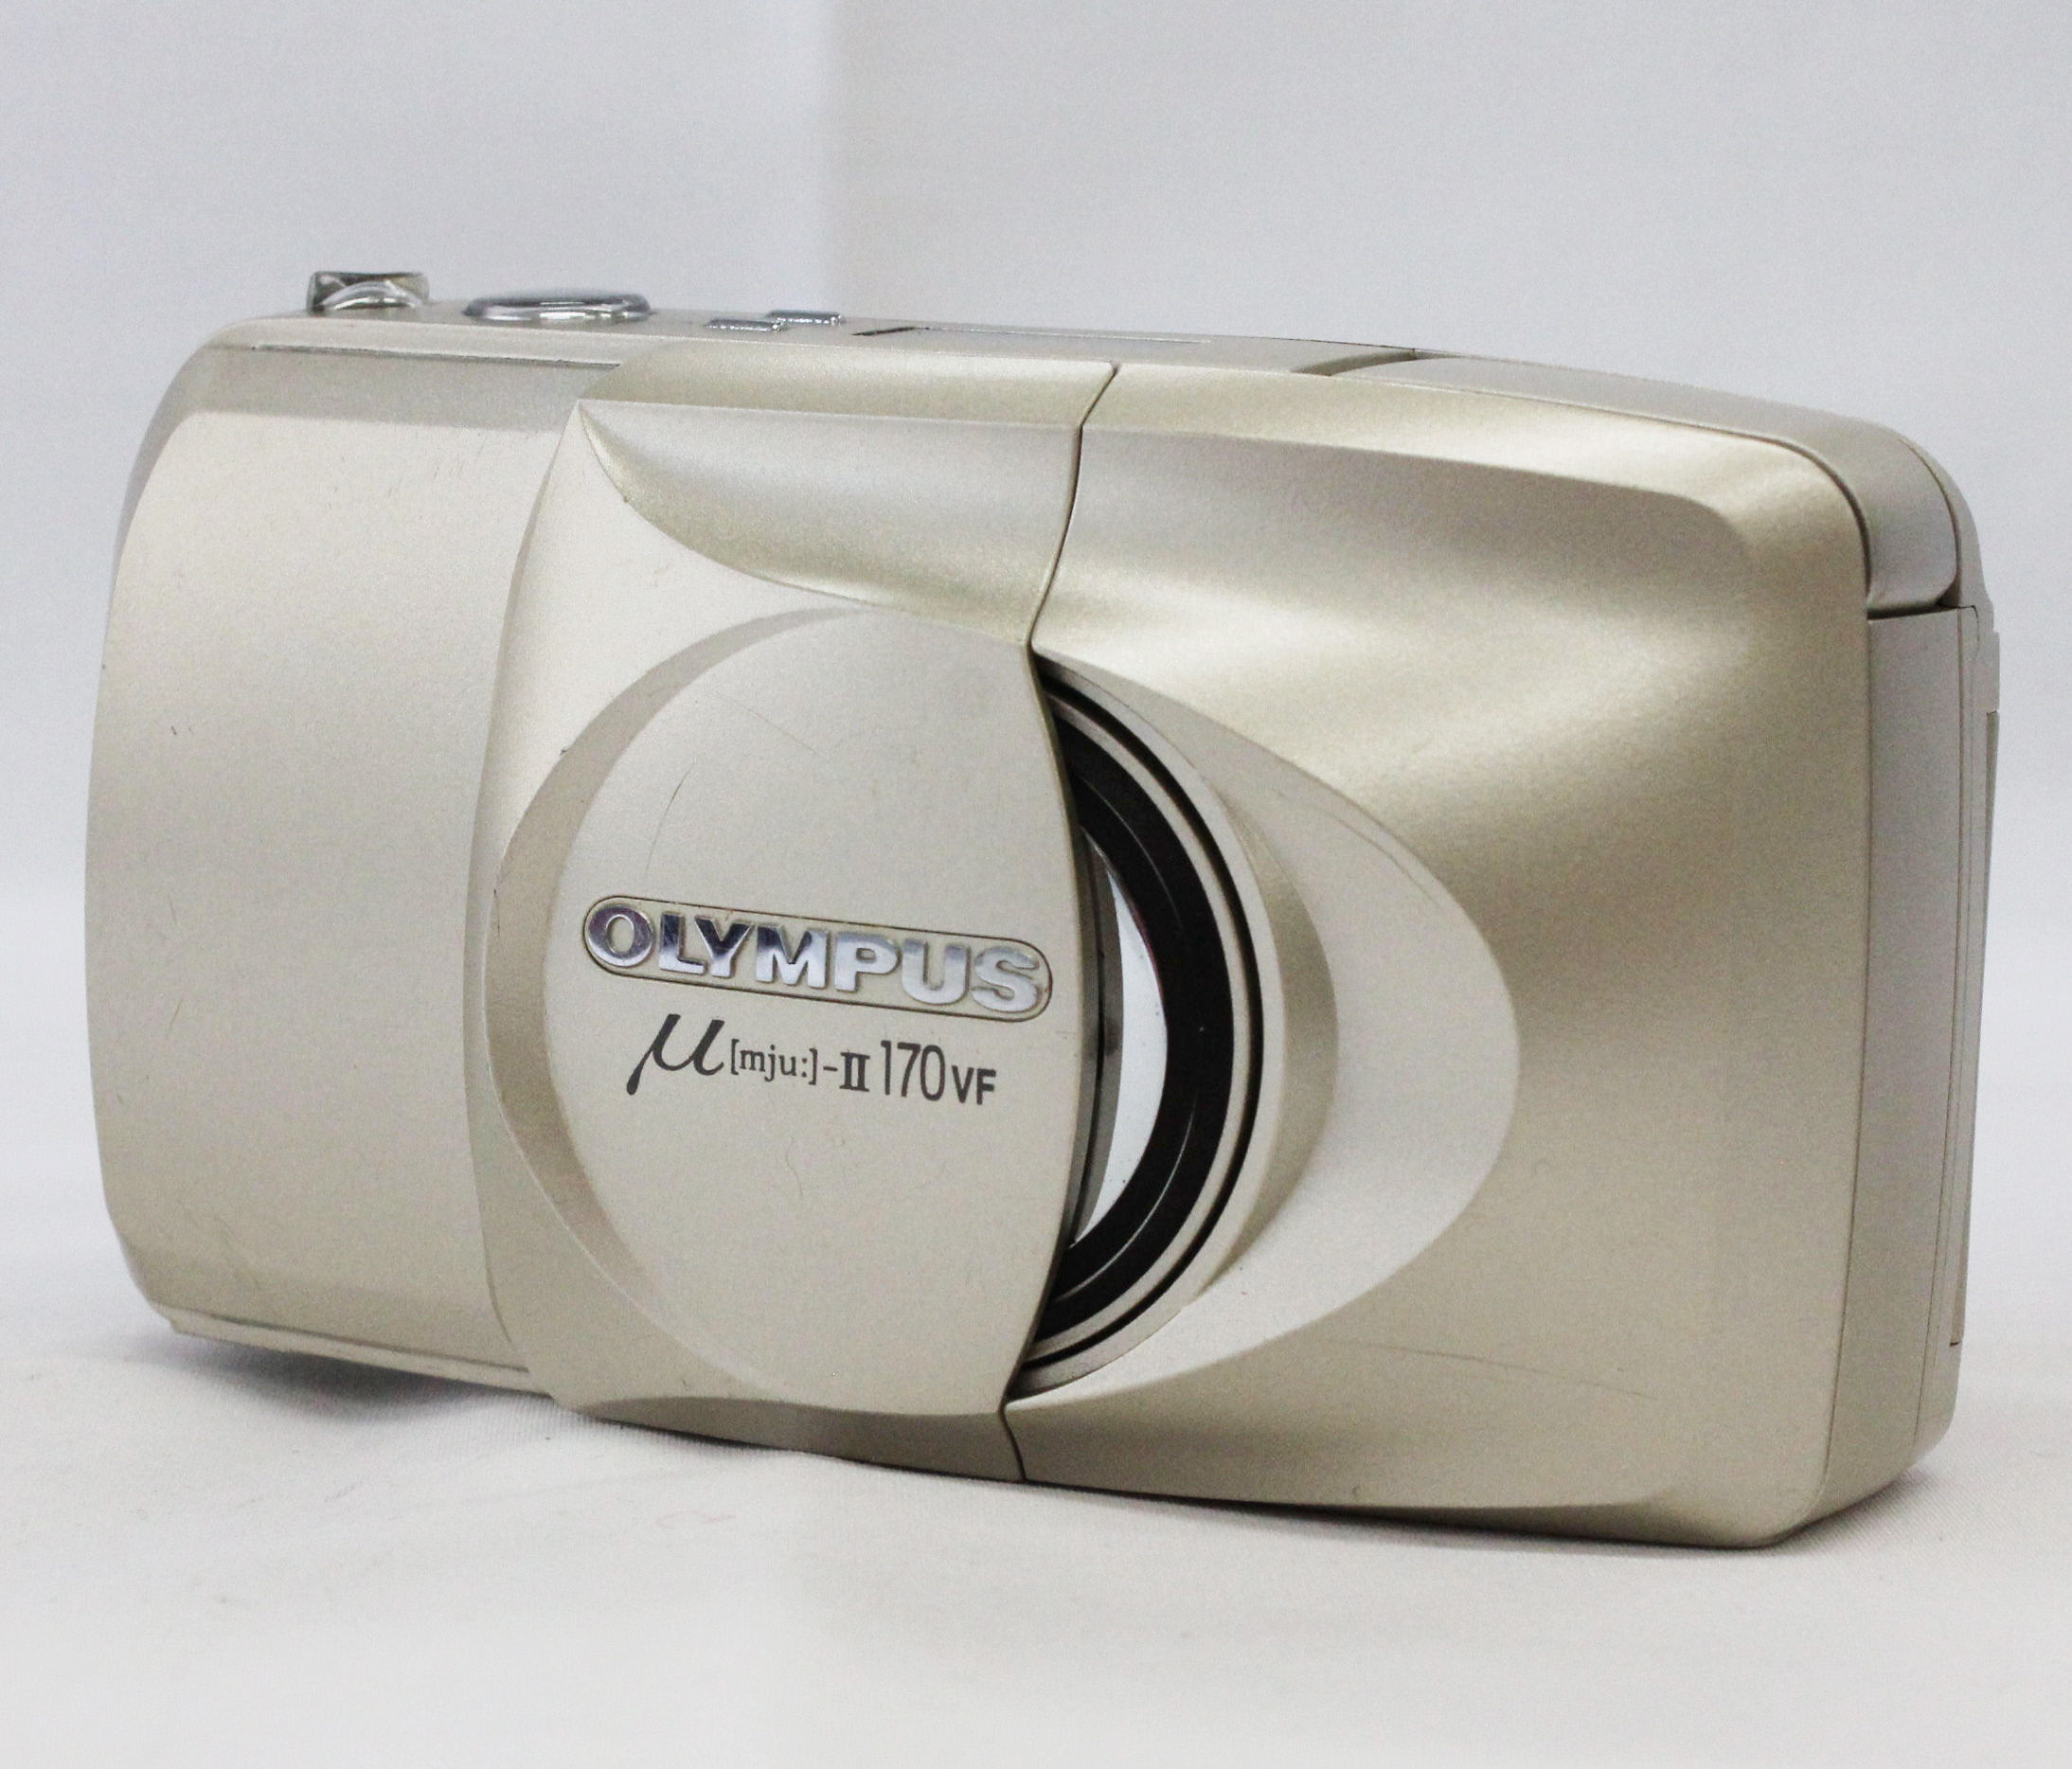  Olympus μ MJU II 170 VF Multi-AF Zoom 35mm Point & Shoot Film Camera with Remote Control RC-300C from Japan Photo 1